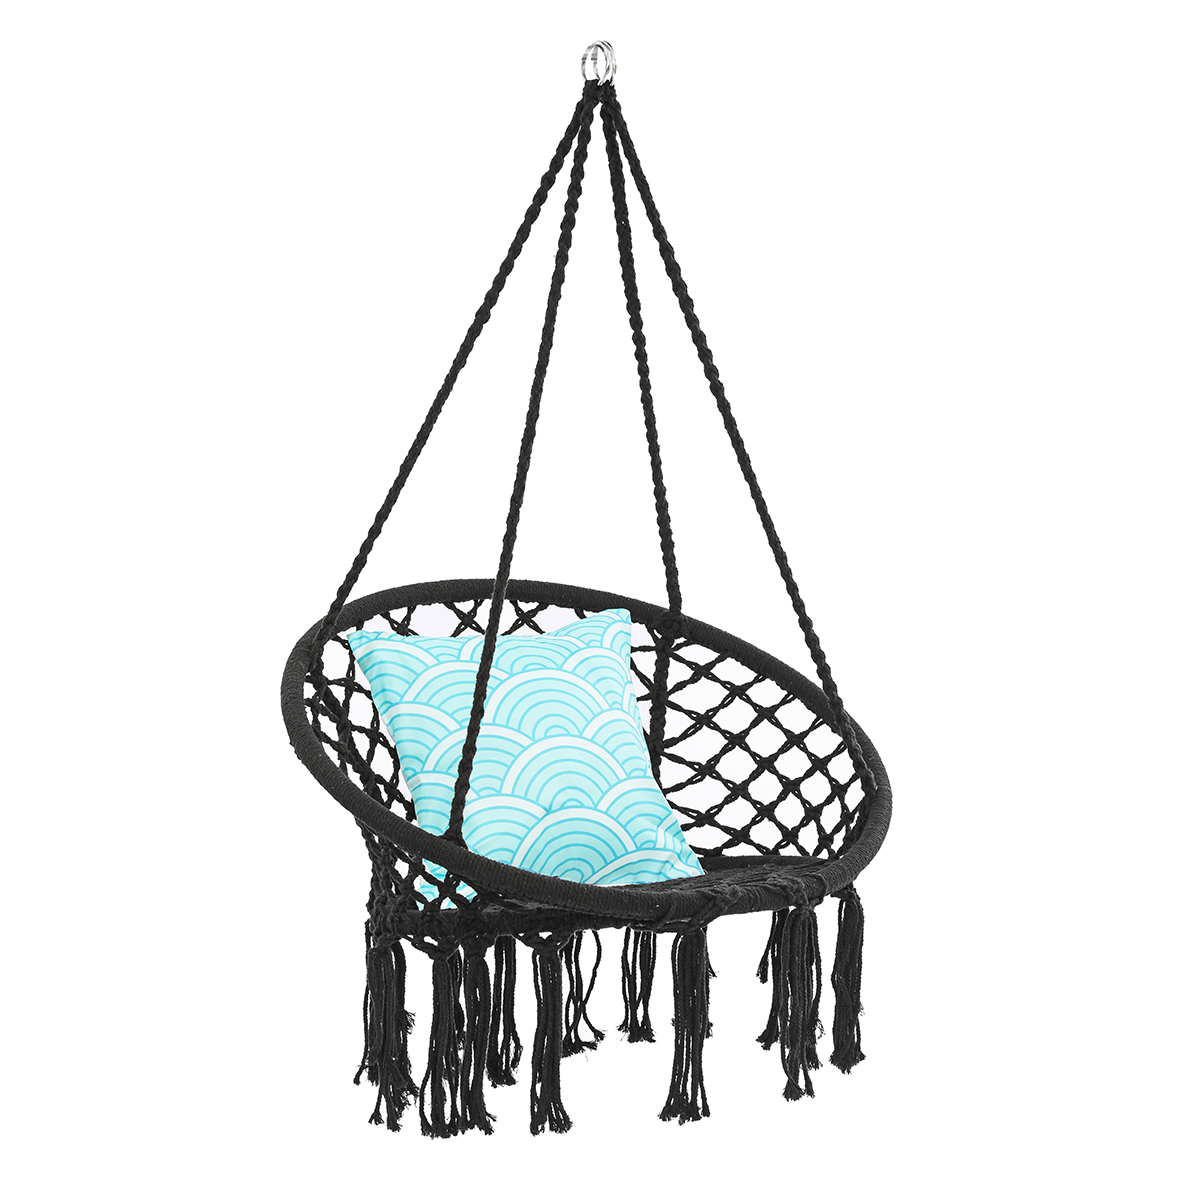 AUGIENB Hammock Chair Hanging Chairs Mesh Woven Macrame Swing Garden Indoor Outdoor Home Decor,100/120/150KG Load-Bearing Christmas Gift - image 3 of 7